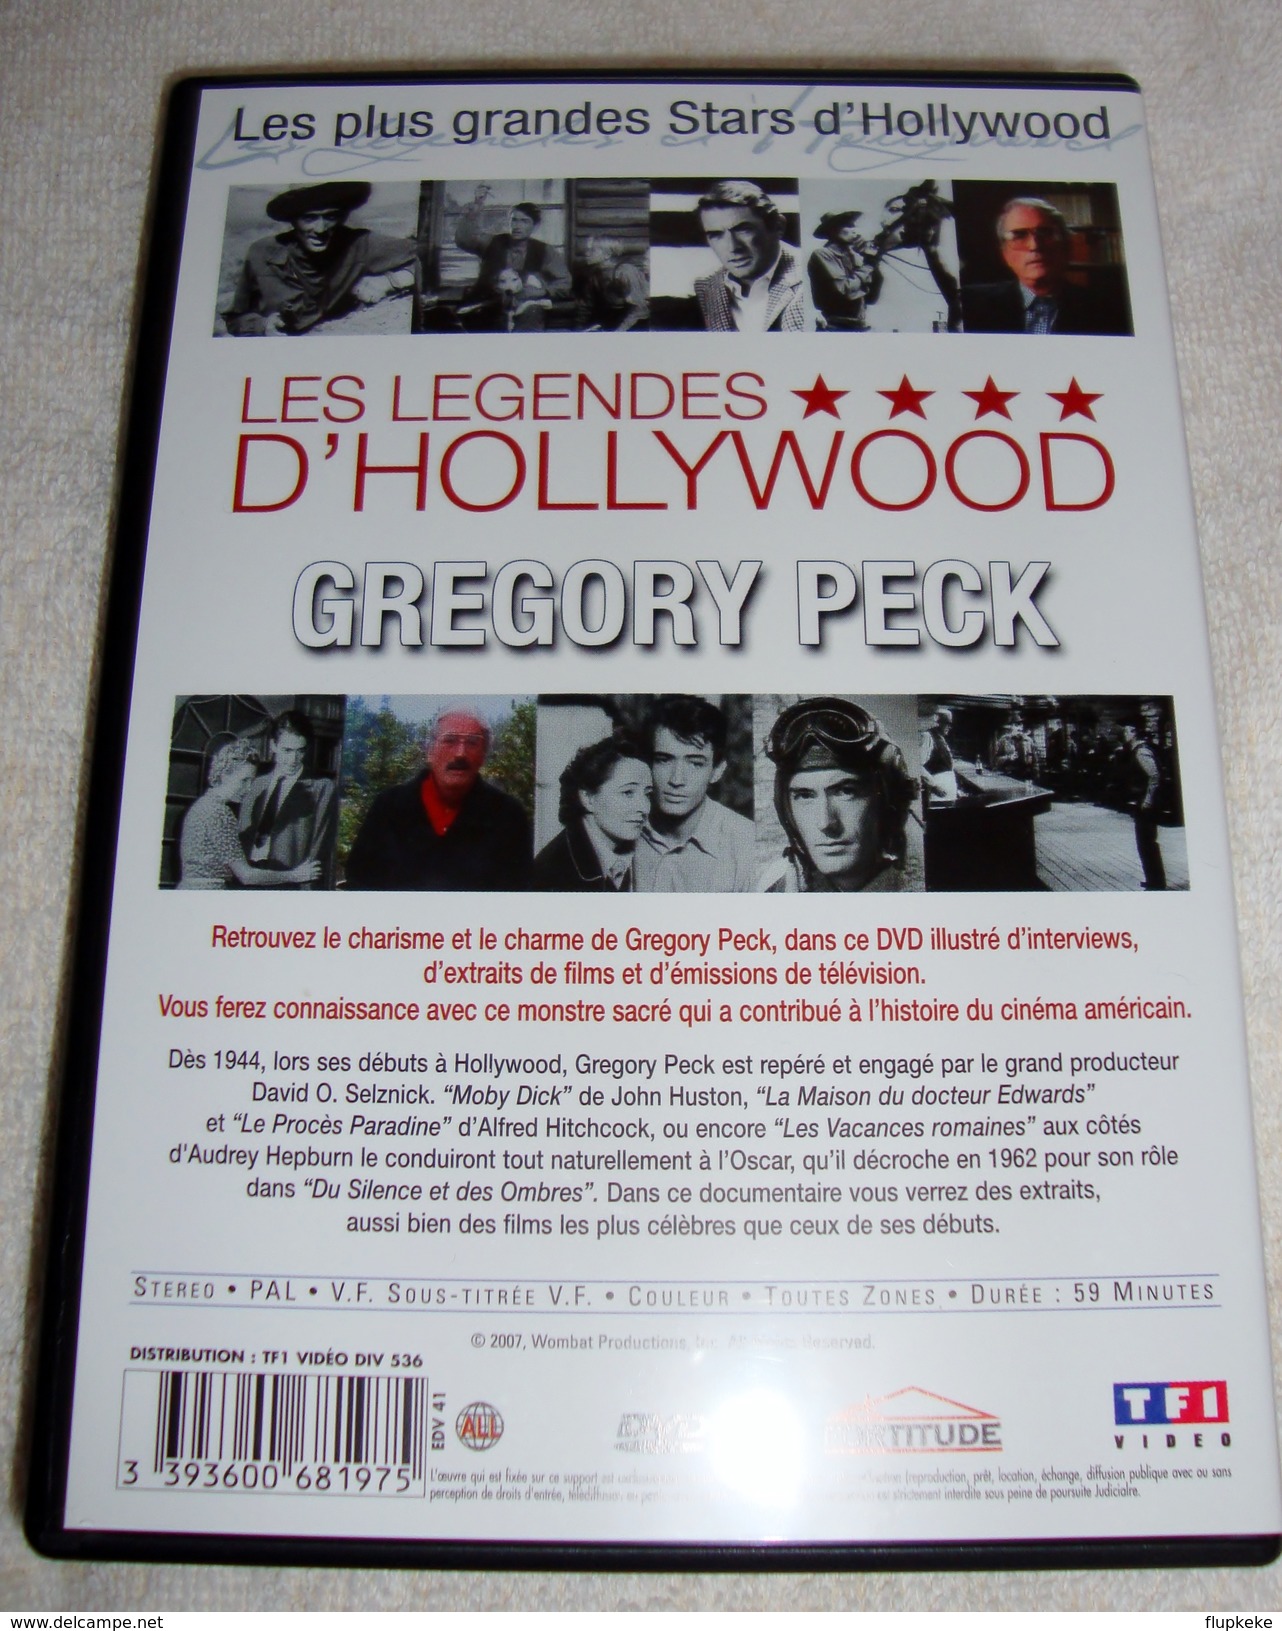 Dvd Zone 2 Les Légendes d'Hollywood Robert Mitchum, Cary Grant, Gary Cooper, Gregory Peck Firtitude Tf1 (2007) 4 dvd Vos